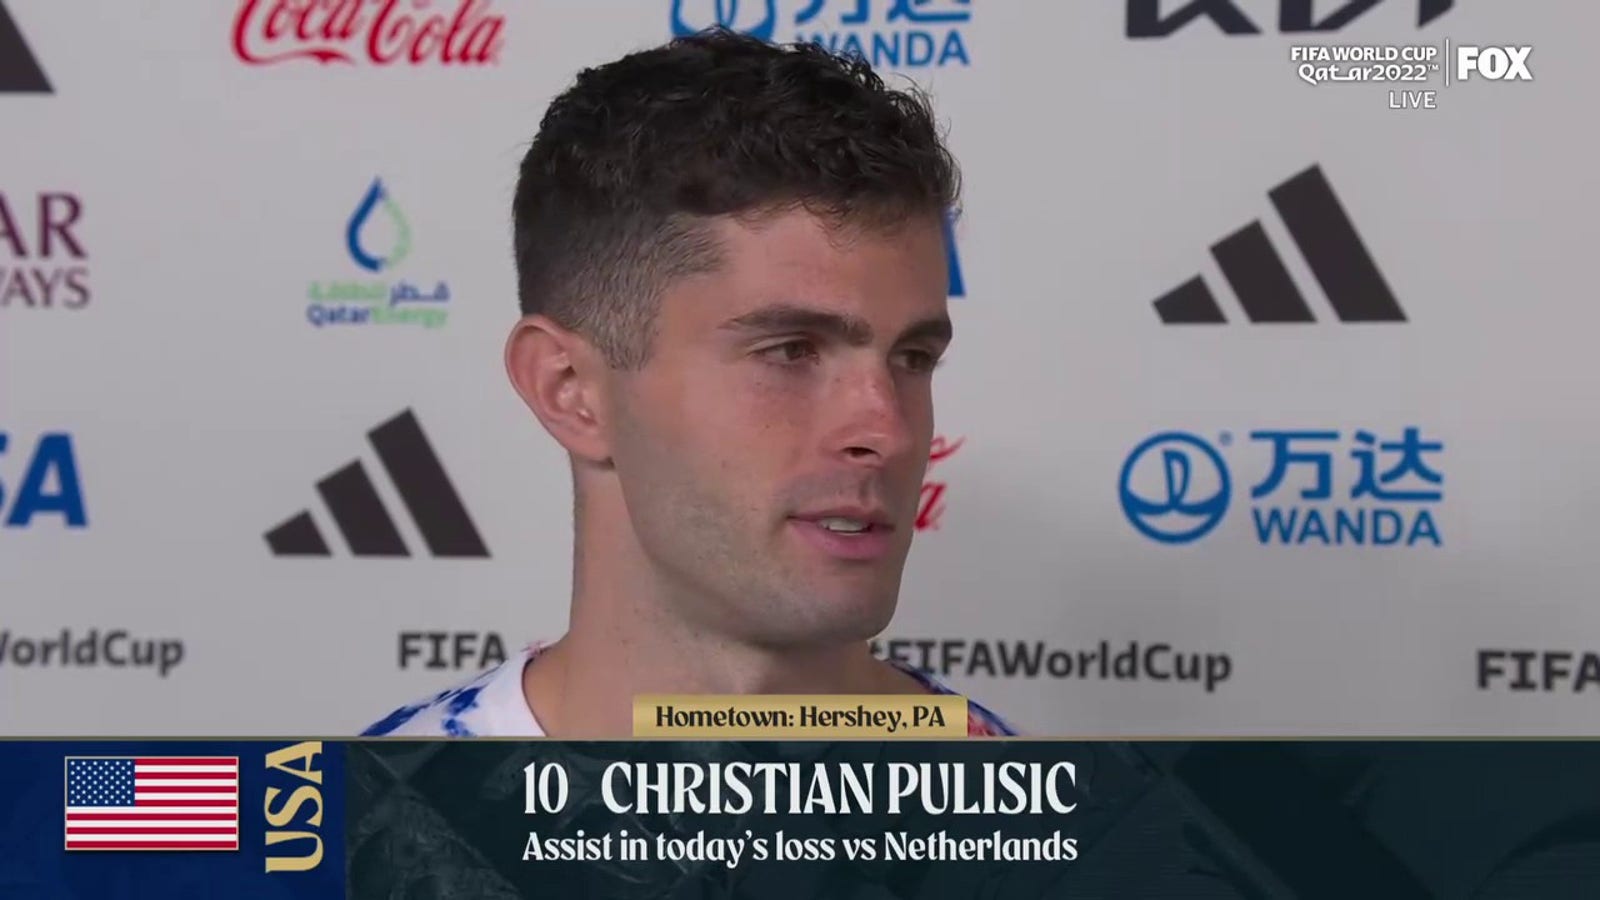 "We deserved more from this tournament" - Christian Pulisic